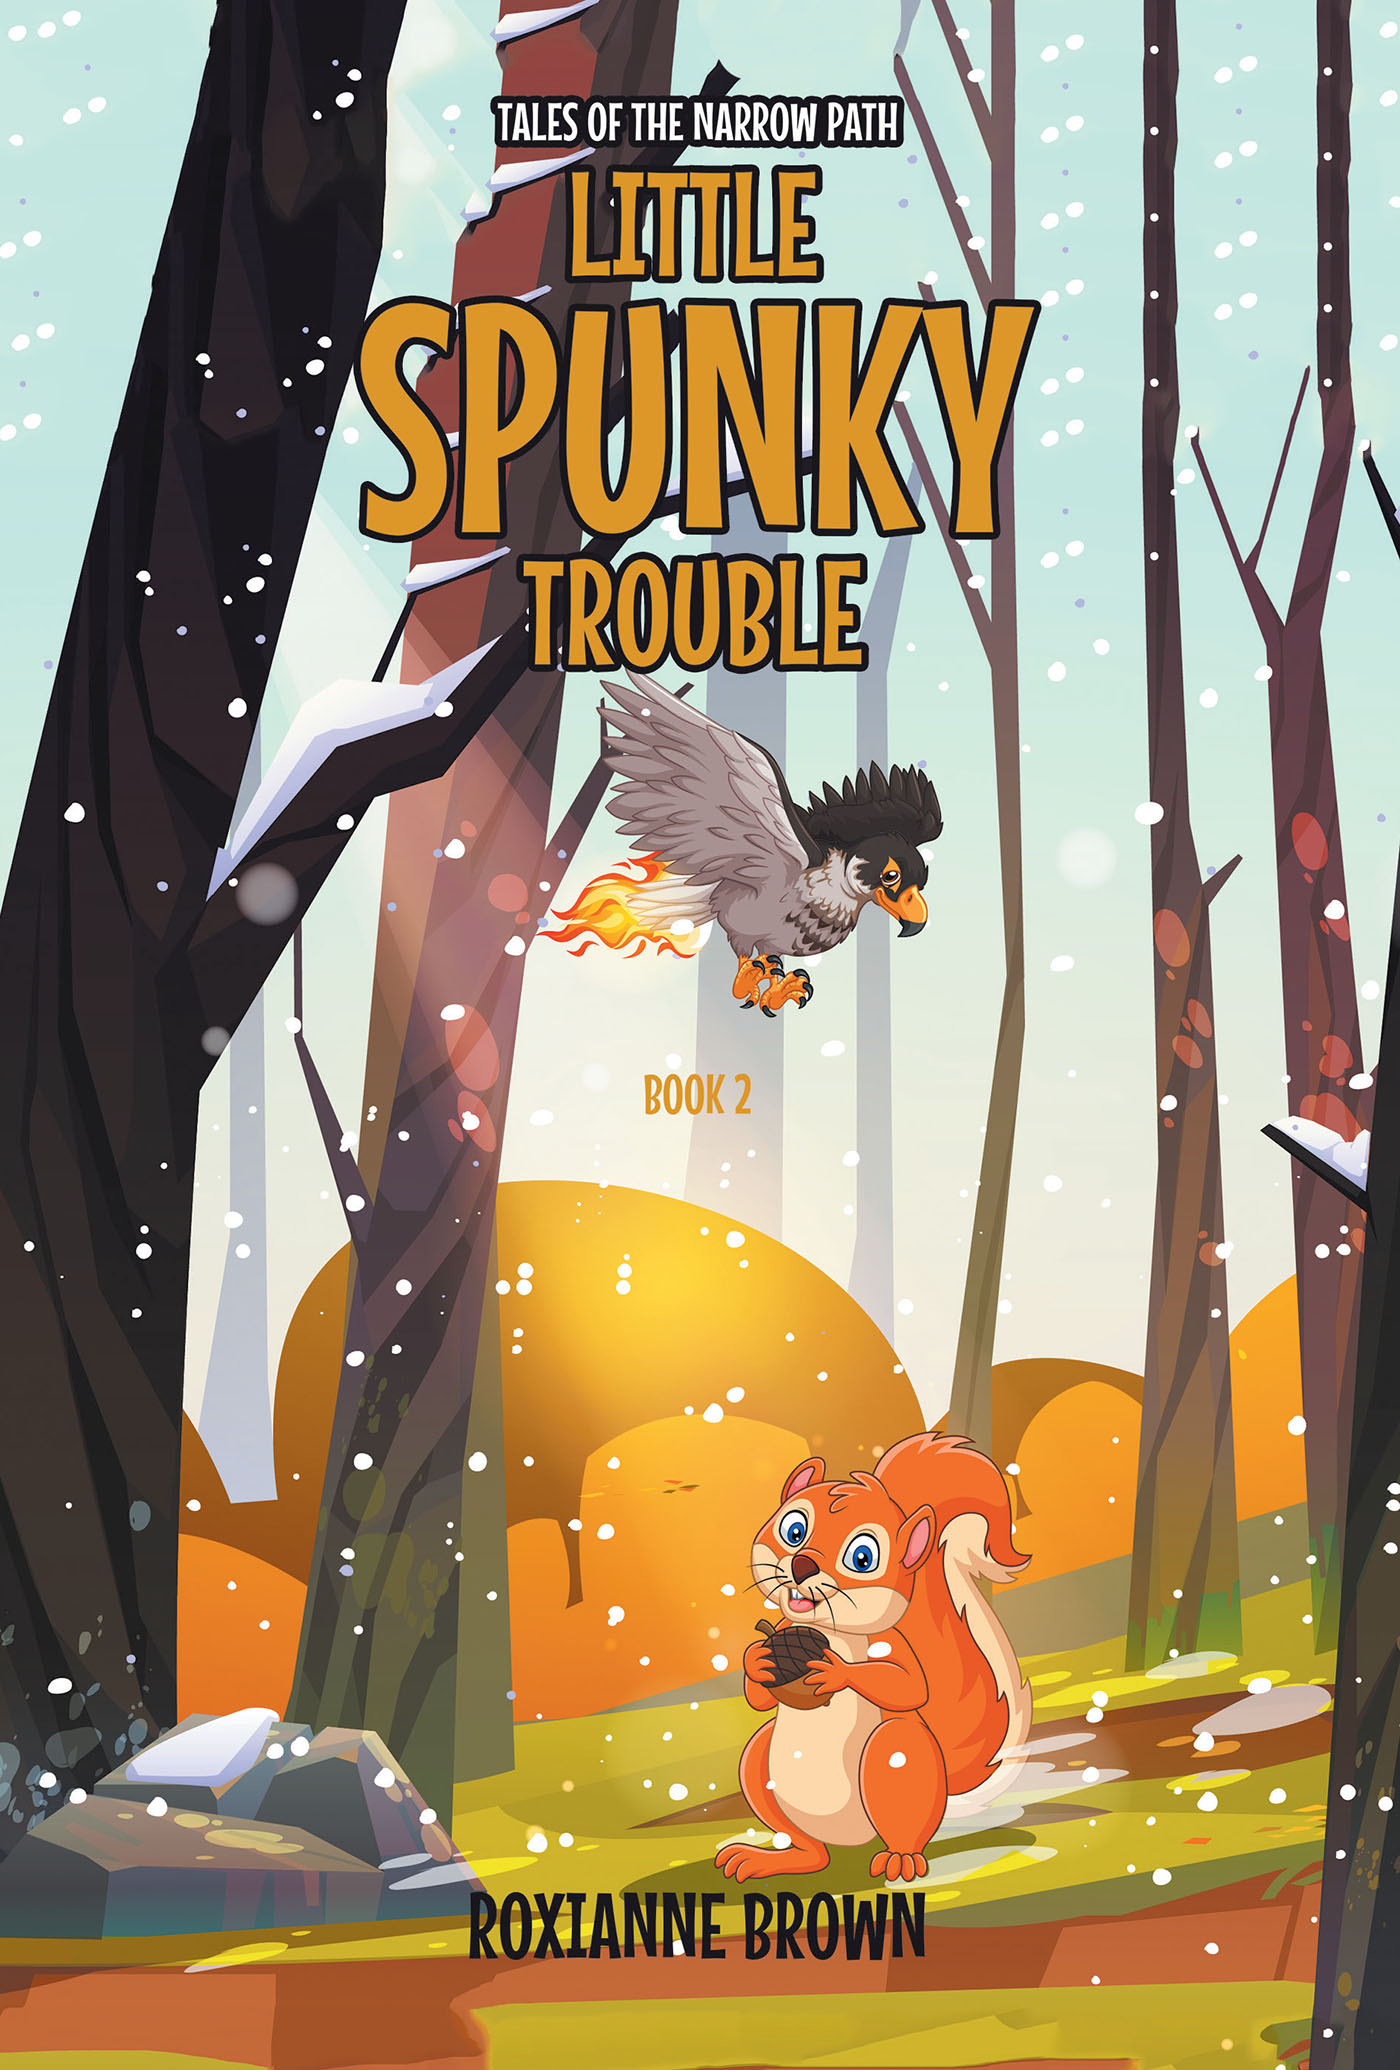 Author Roxianne Brown’s New Book, "Little Spunky Trouble: Book 2," is a Delightful Story About Spunky the Chipmunk and All His Remarkable Adventures